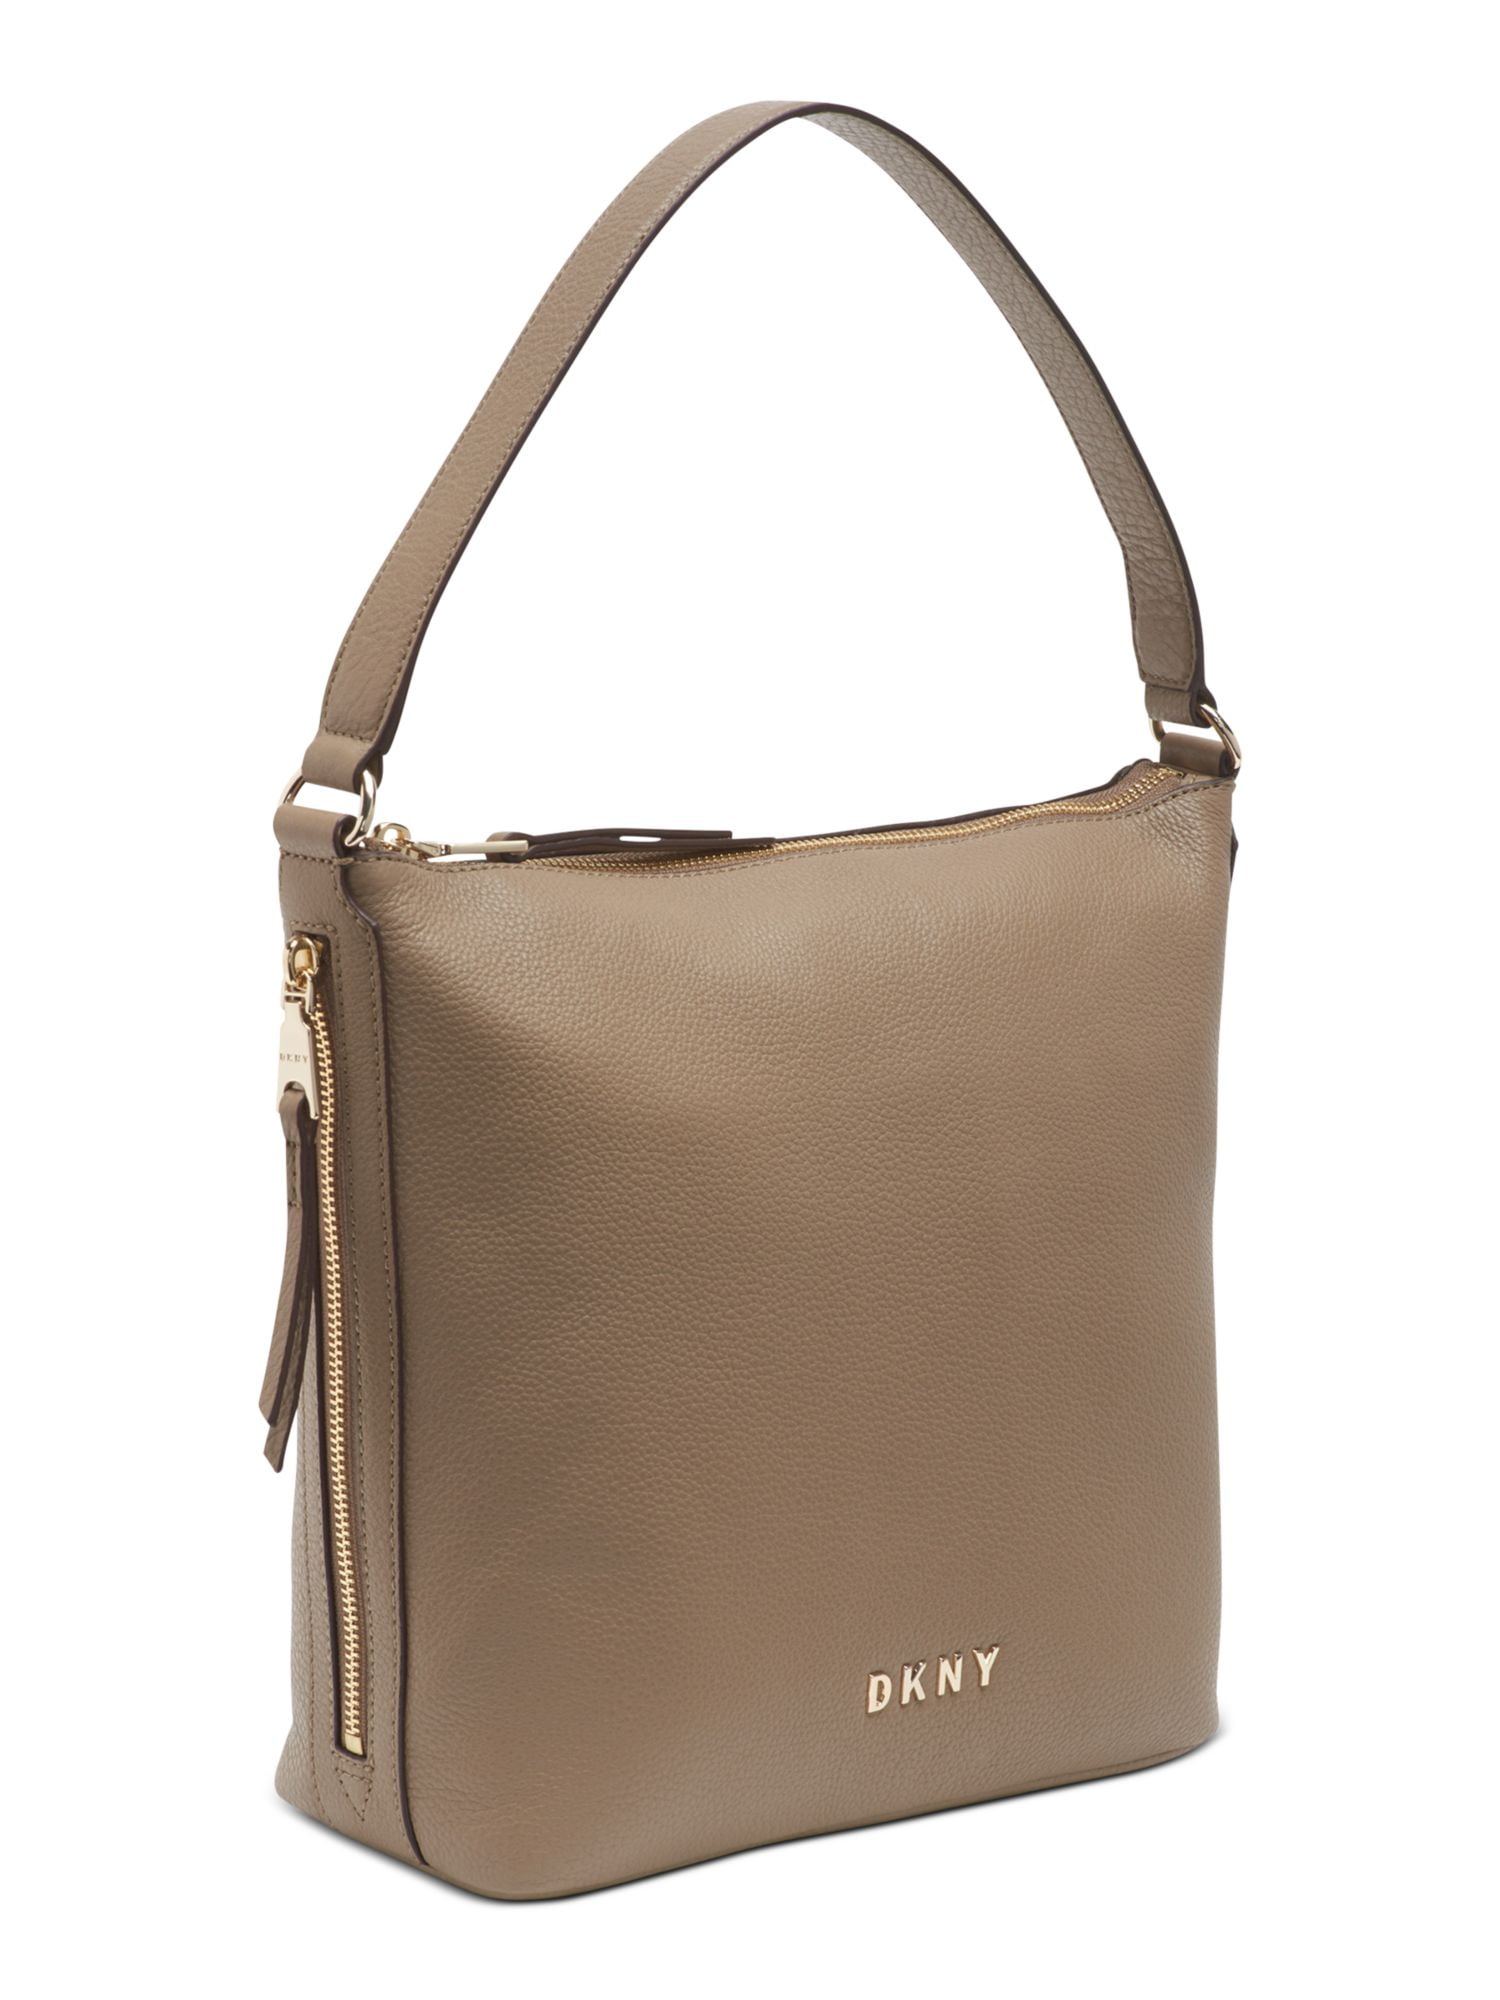 Leather DKNY purse - clothing & accessories - by owner - apparel sale -  craigslist